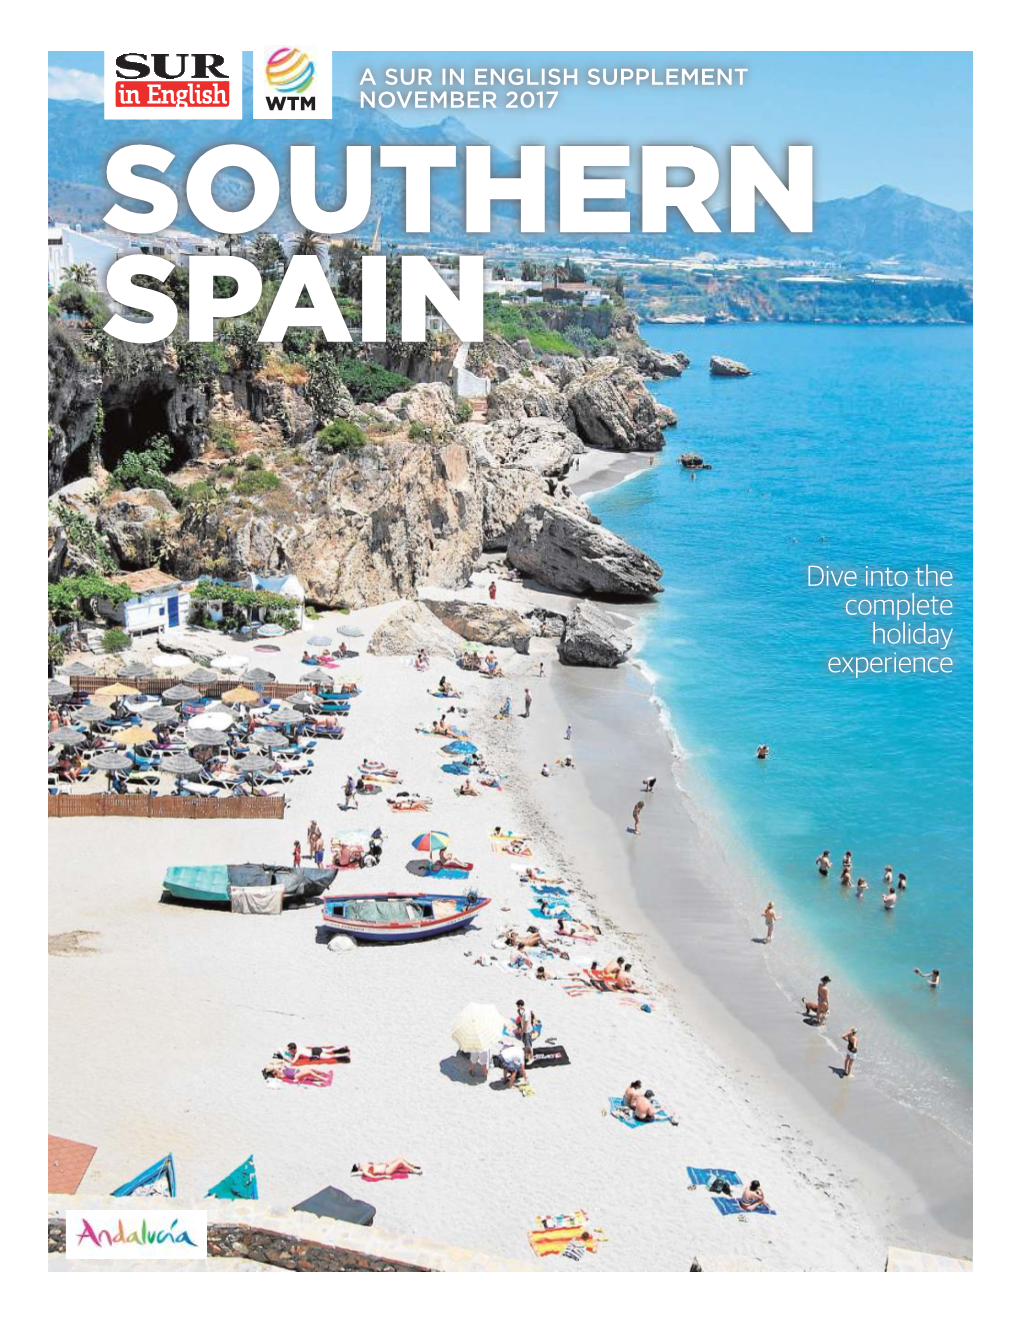 Dive Into the Complete Holiday Experience November 2017 2 SUR in ENGLISH November 2017 SOUTHERN 3 SUR in ENGLISH SPAIN